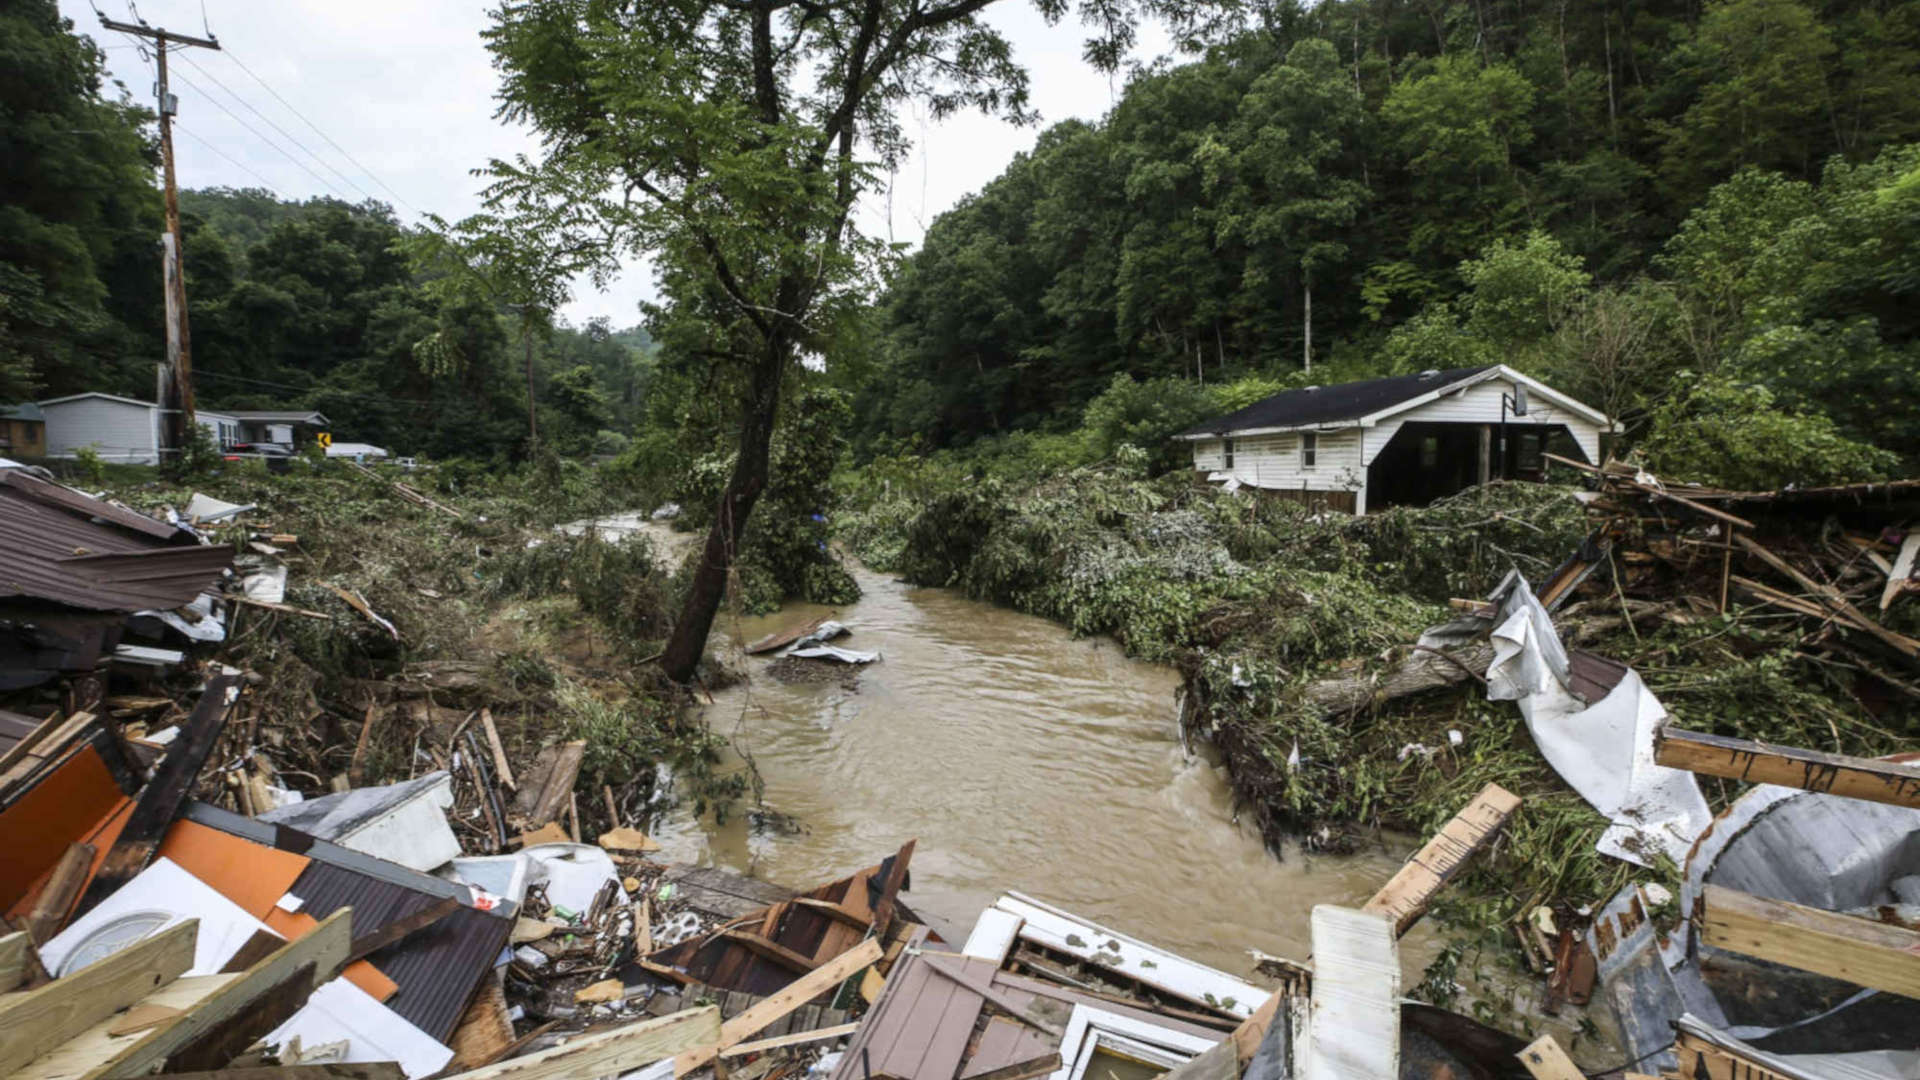 Debris from destroyed homes piles up near a concrete bridge over Grapevine Creek in Perry County after torrential rain caused flash flooding in Eastern Kentucky on July 28, 2022.